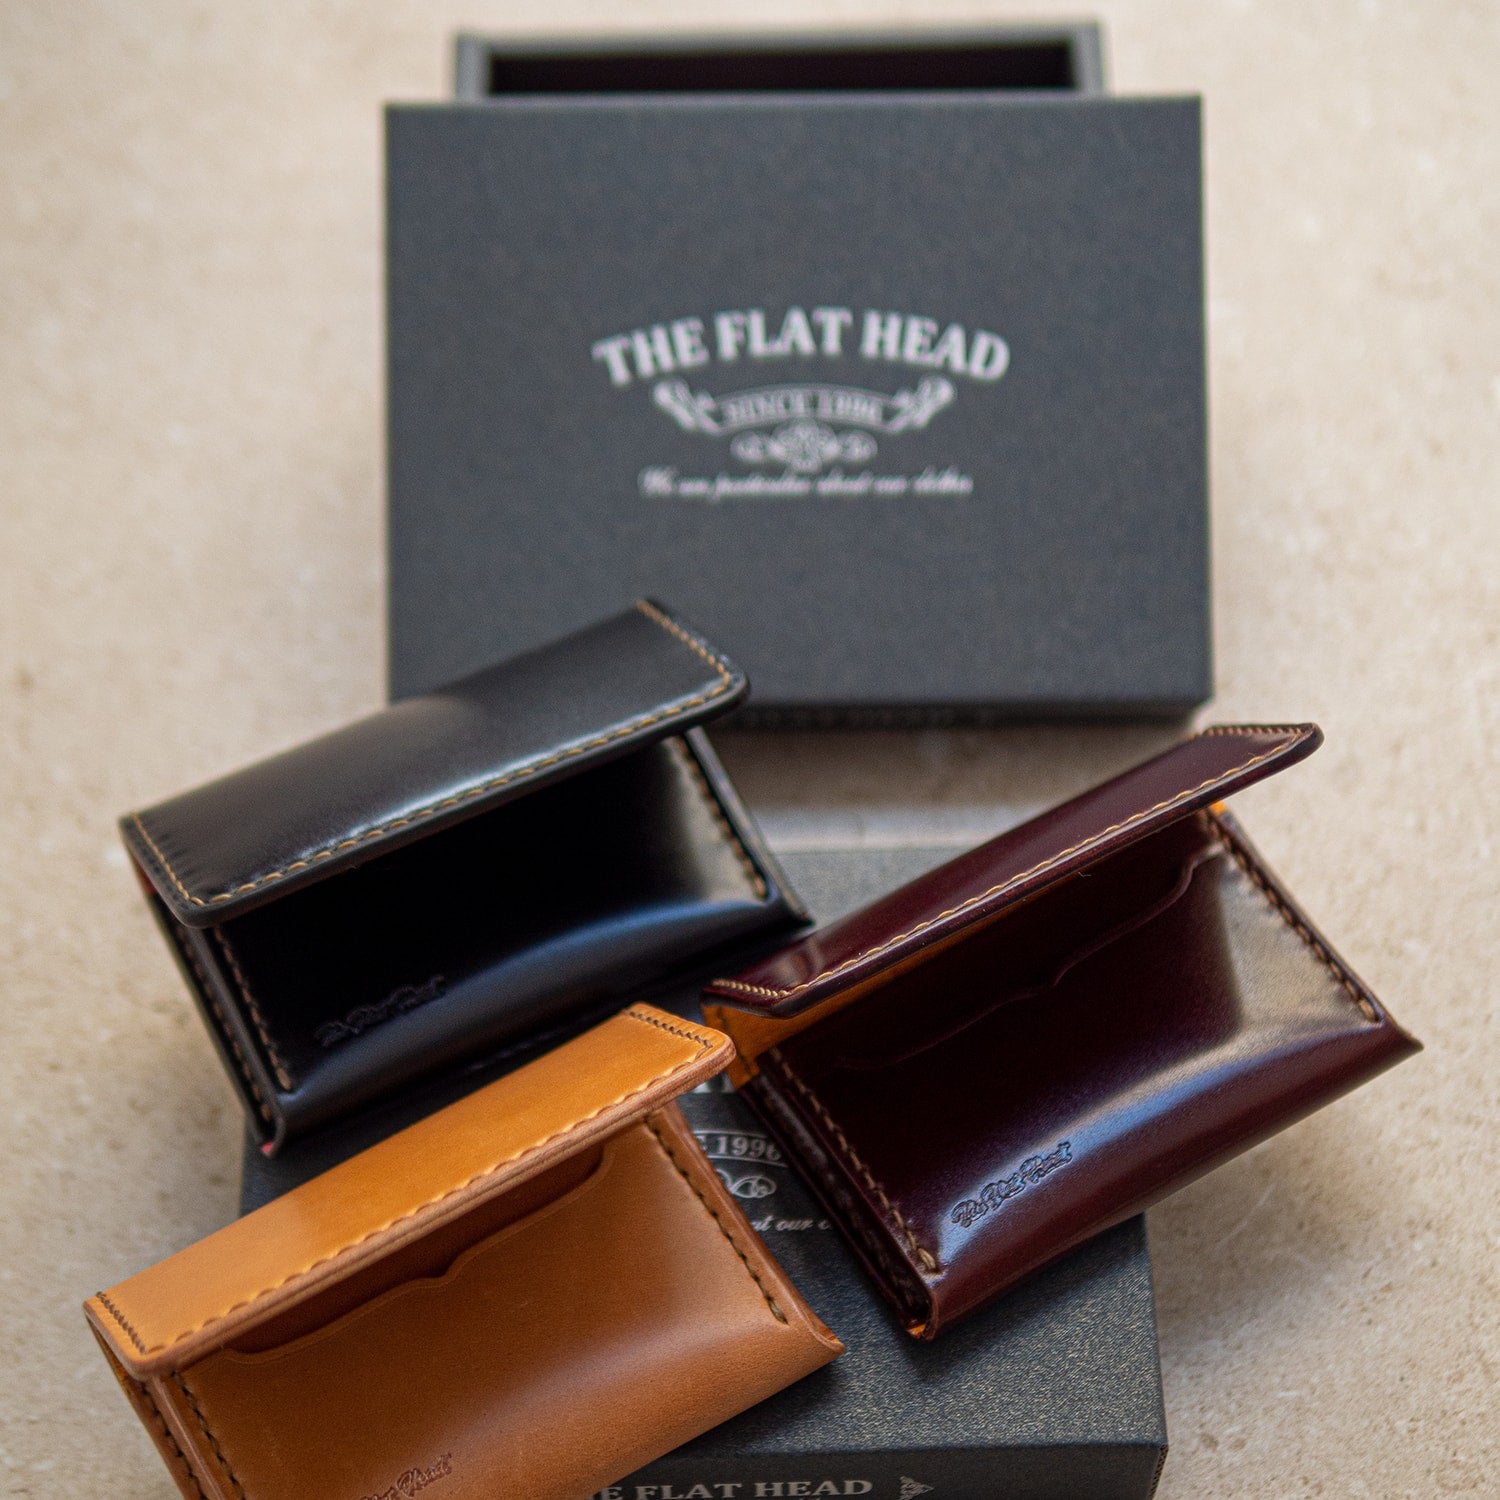 The Flat Head cordovan leather wallets